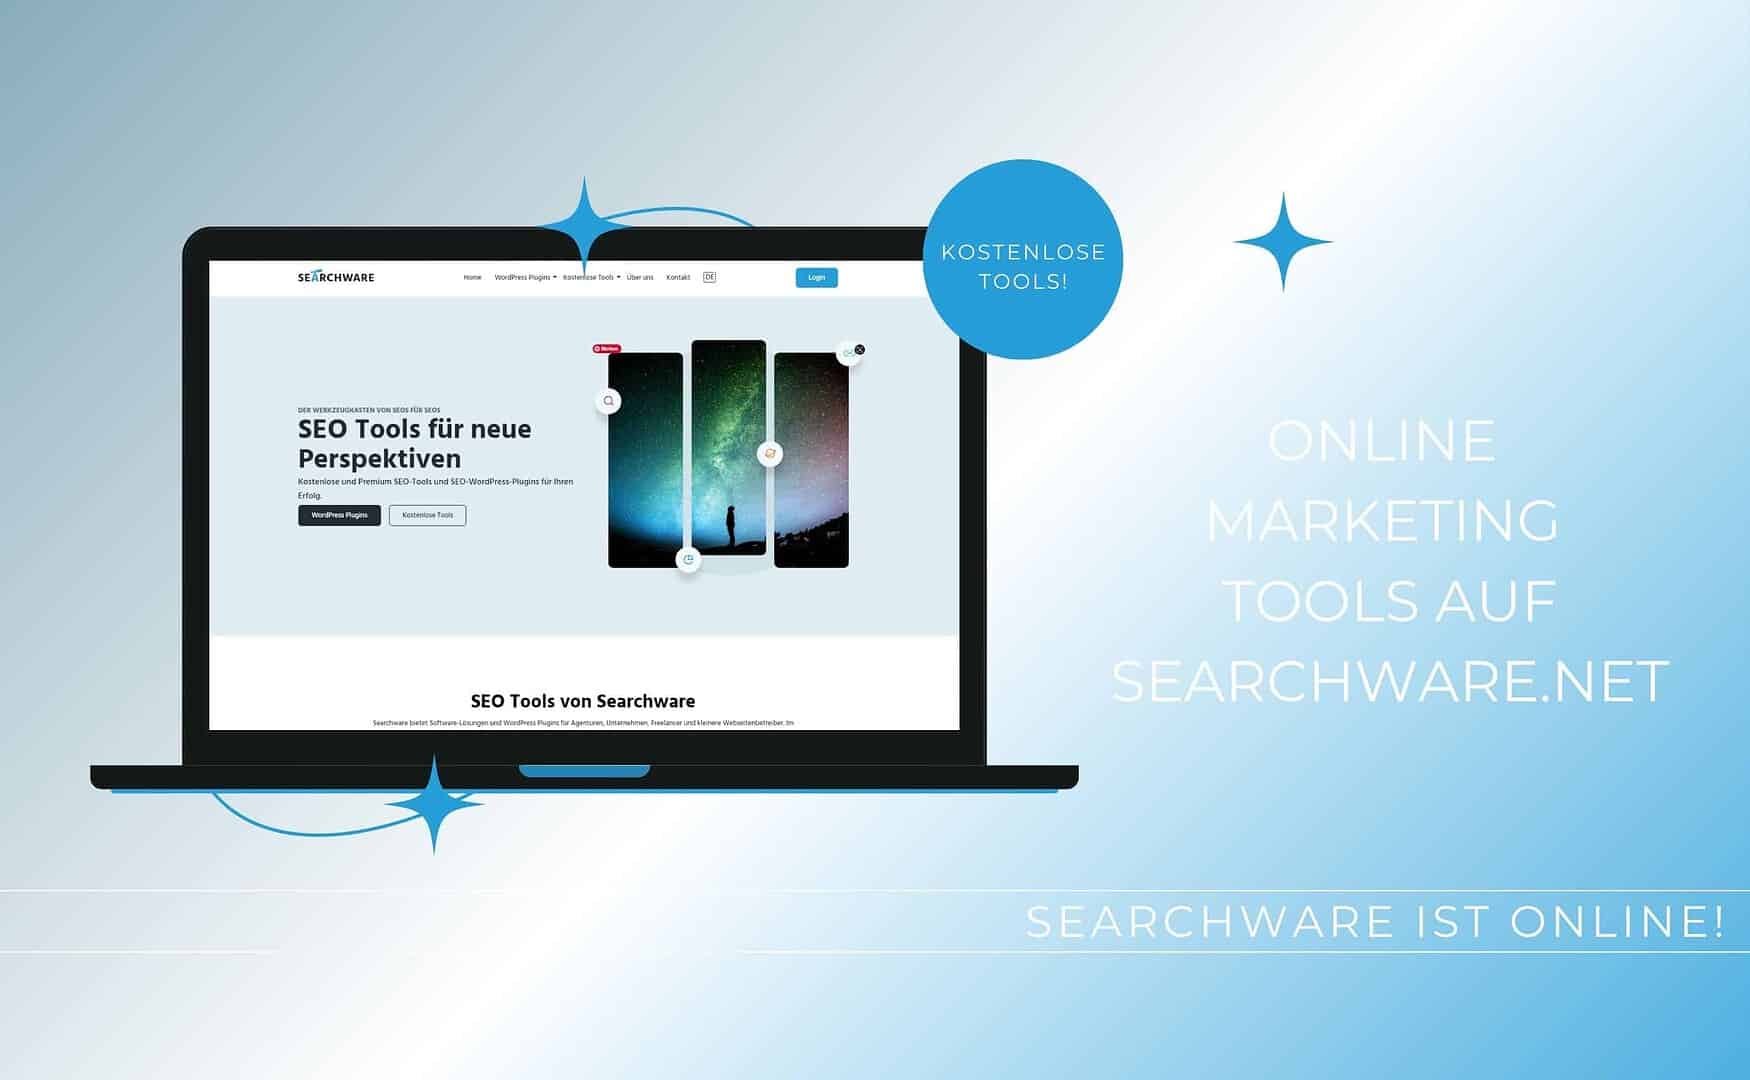 Searchware